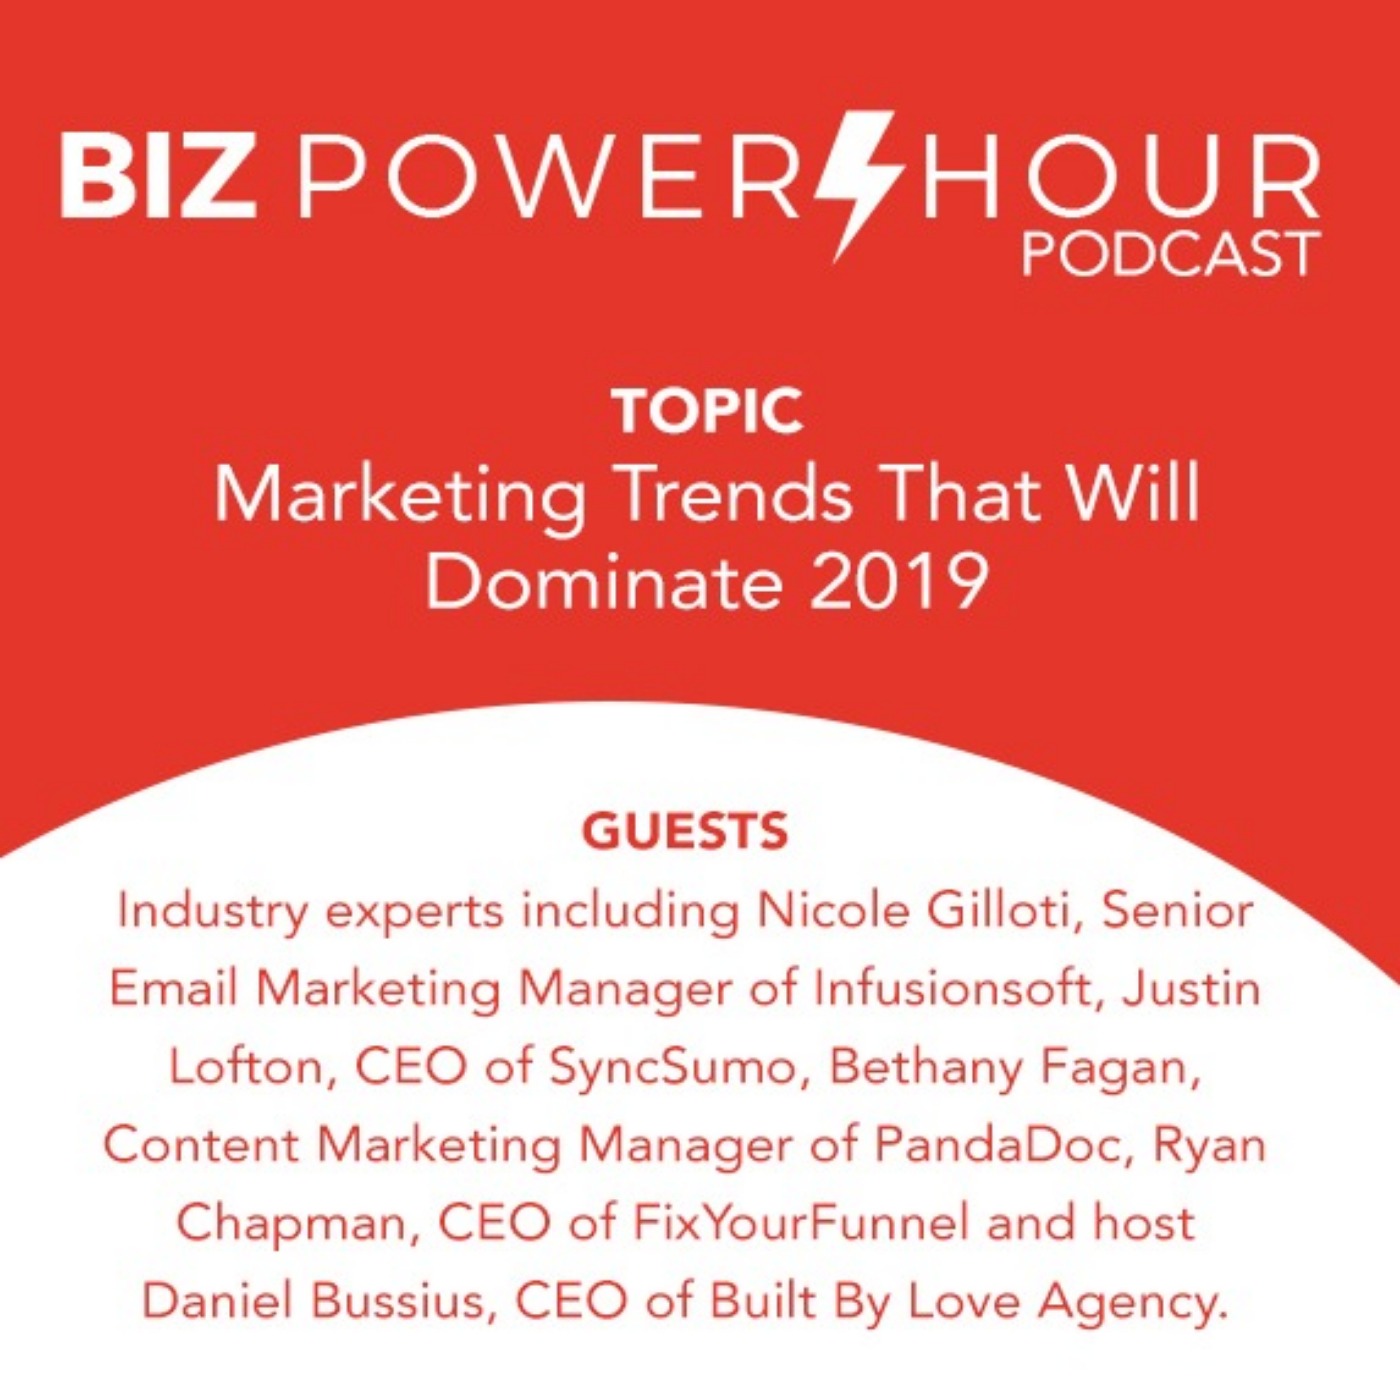 EP1-Marketing Trends That Will Dominate 2019